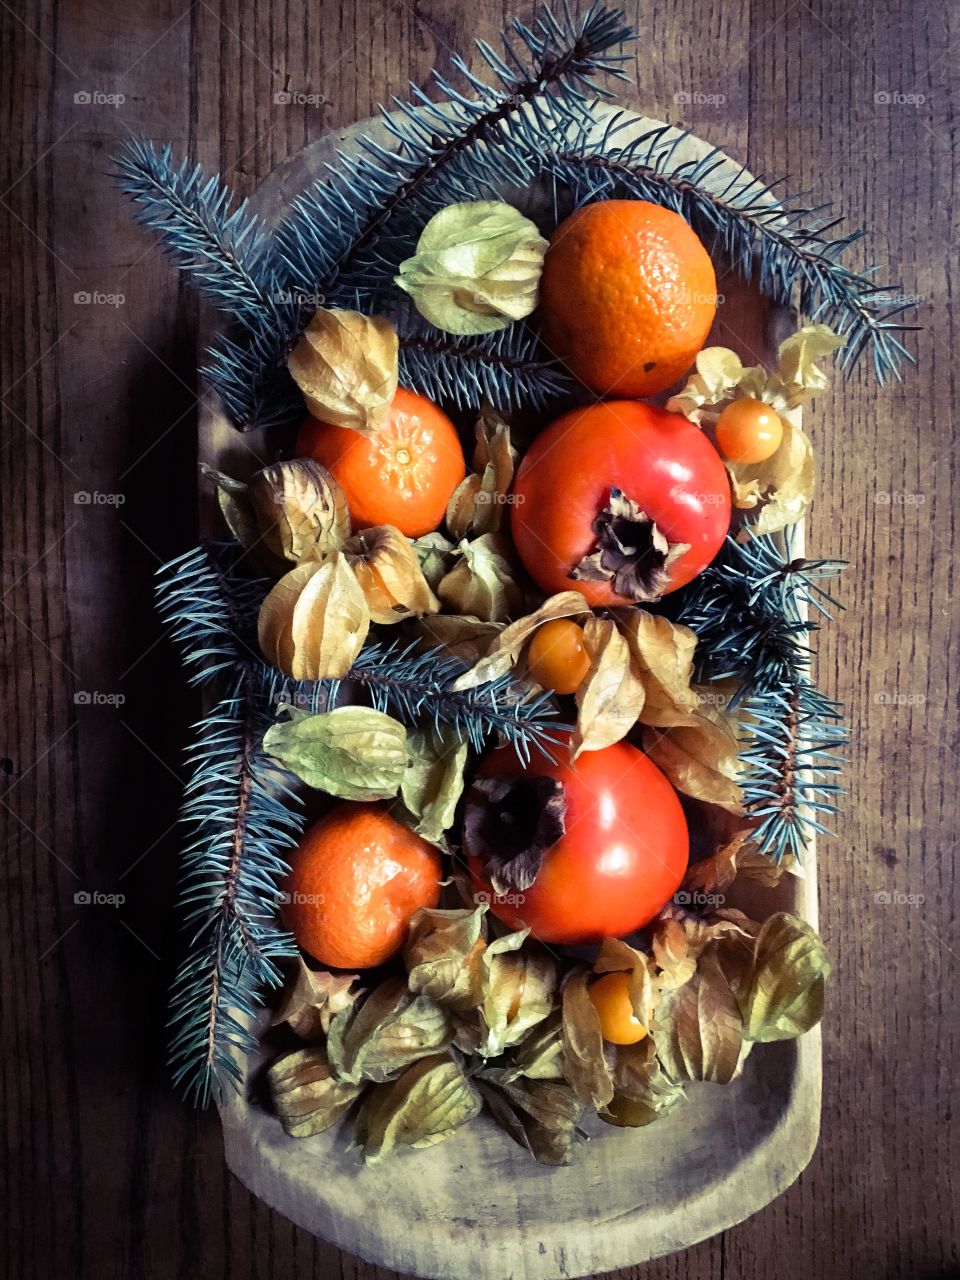 Winter fruit gathered in a wooden plate/bowl